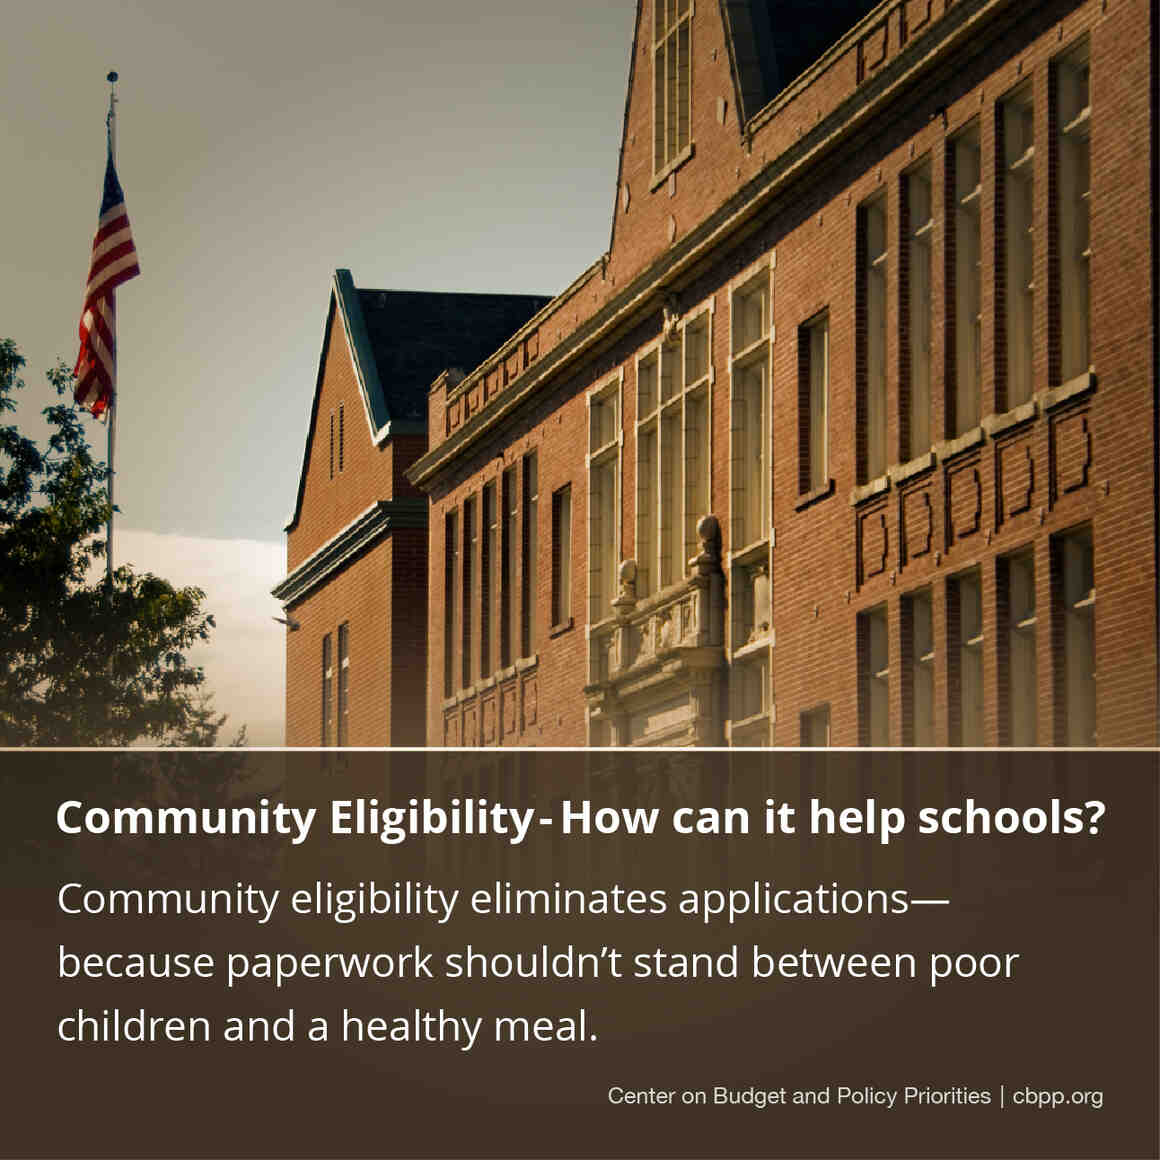 Photographic: Community Eligibility: How can it help schools?